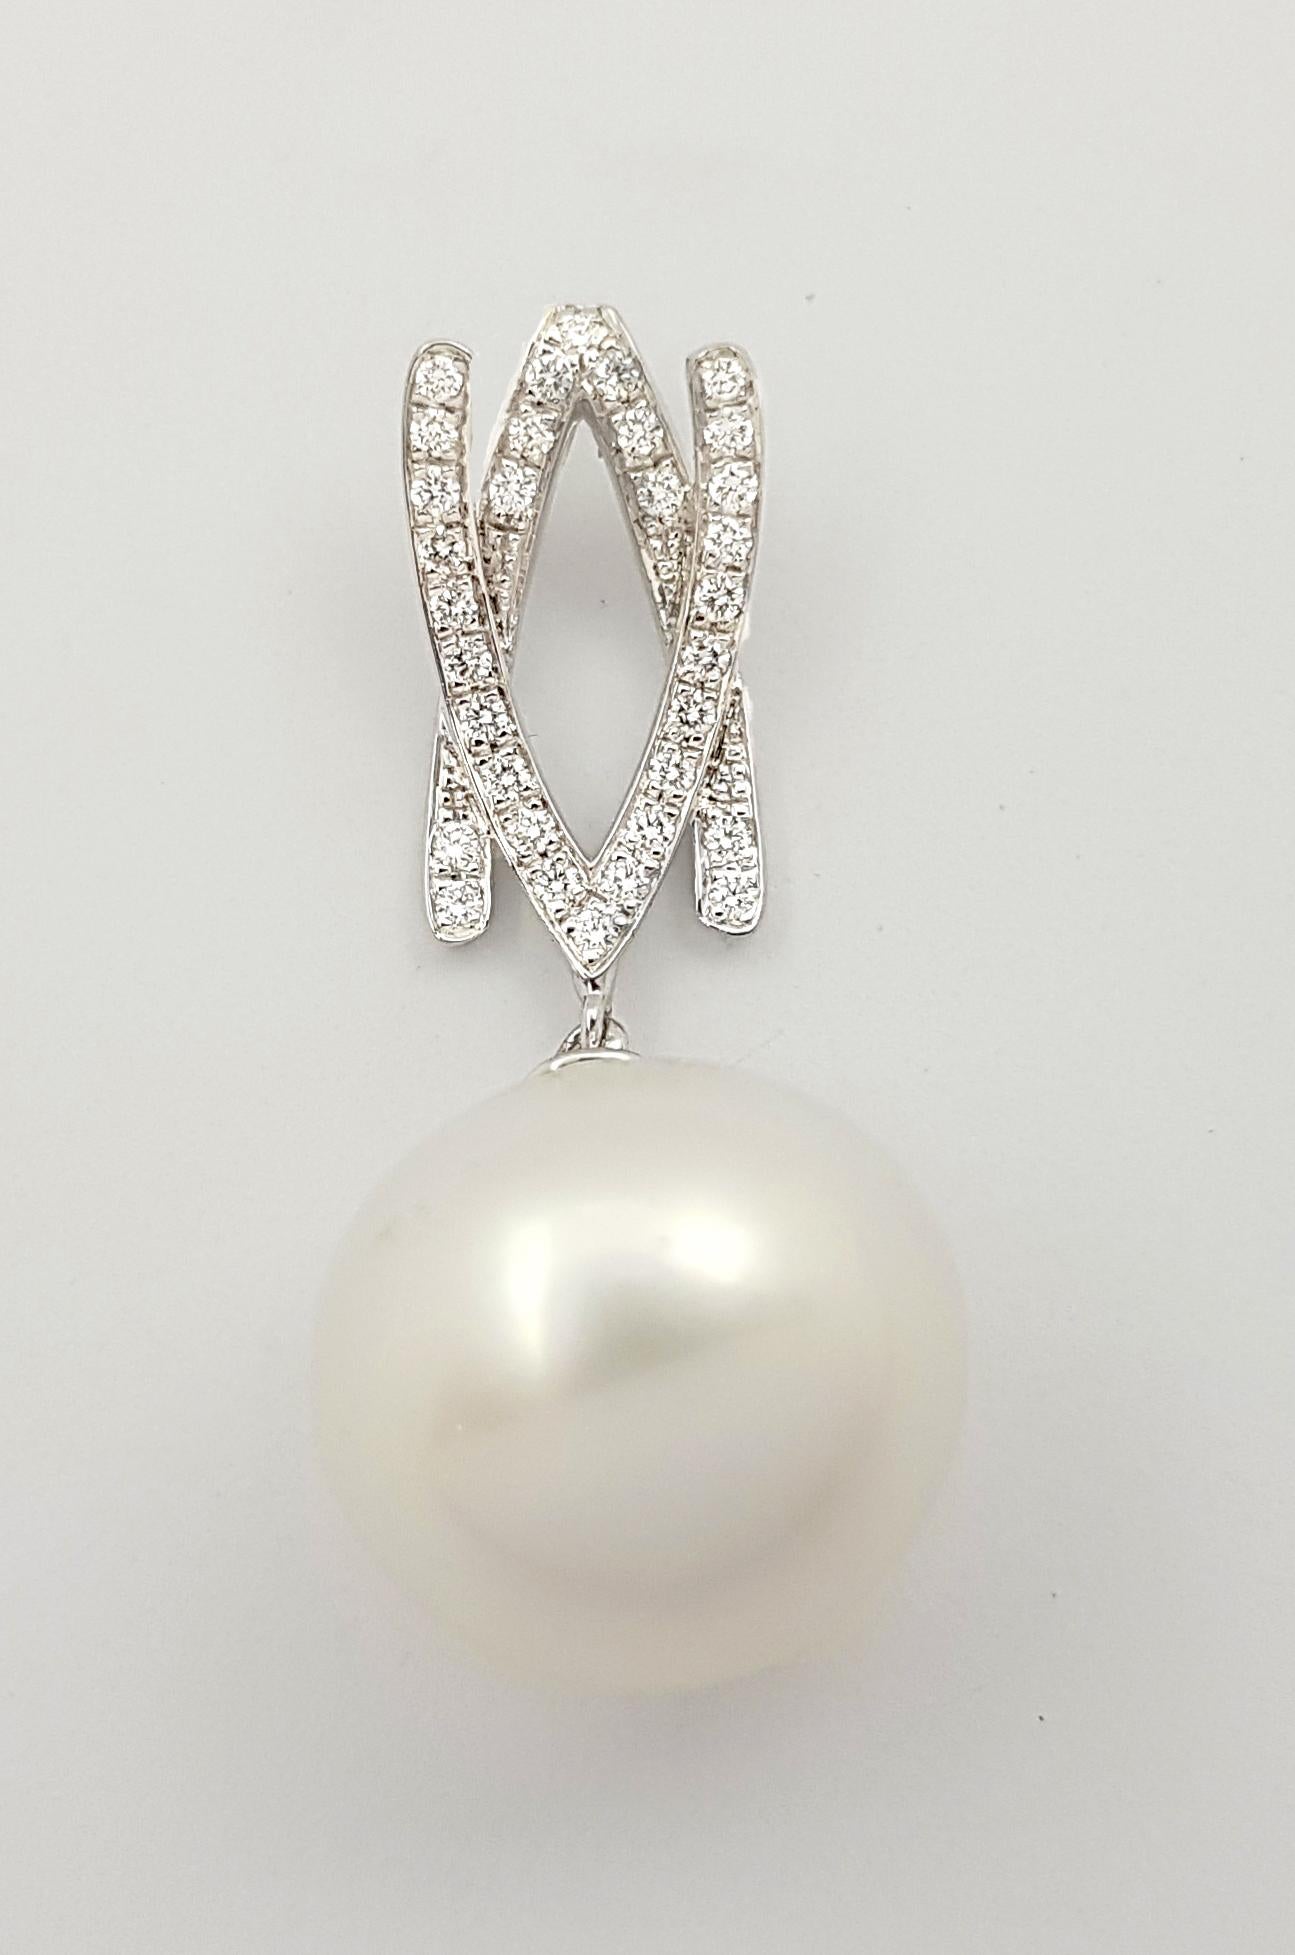 South Sea Pearl with Diamond 0.22 carat Pendant set in 18K White Gold Settings
(chain not included)

Width: 0.9 cm 
Length: 3.6 cm
Total Weight: 6.49 grams

South Sea Pearl: 15 mm

